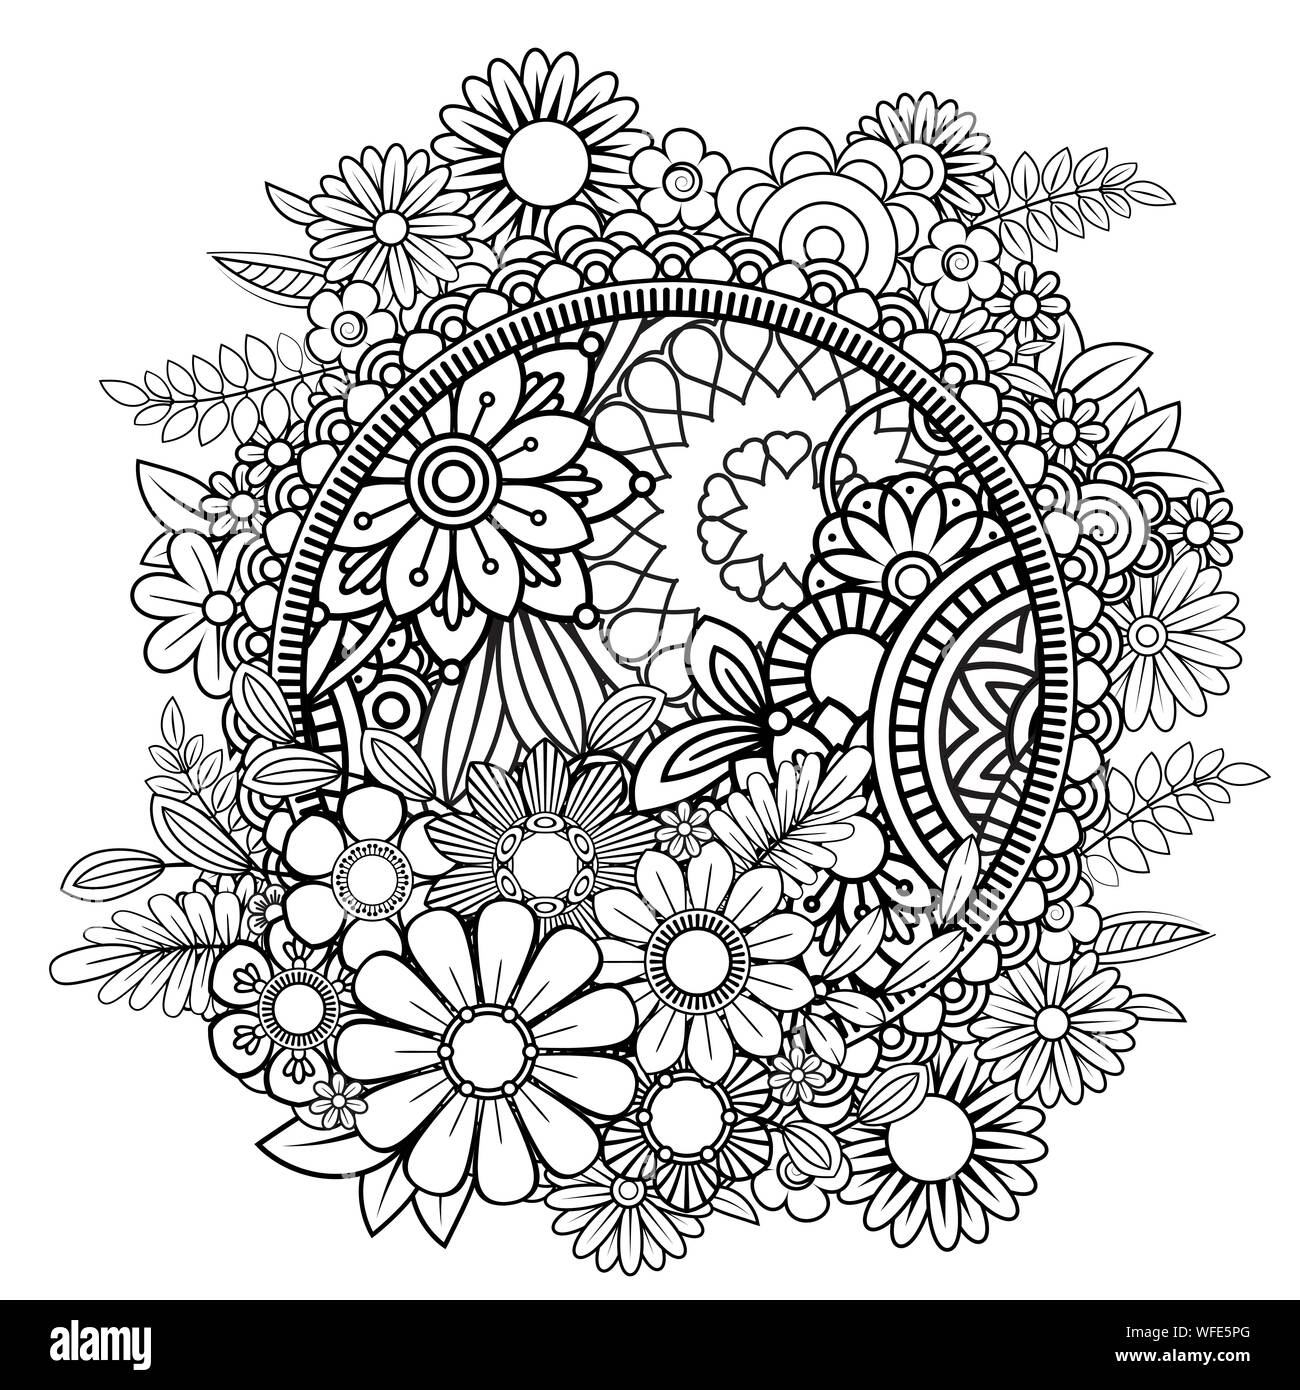 Adult coloring page with flowers pattern black and white doodle wreath floral mandala bouquet line art vector illustration isolated on white background round design element stock vector image art